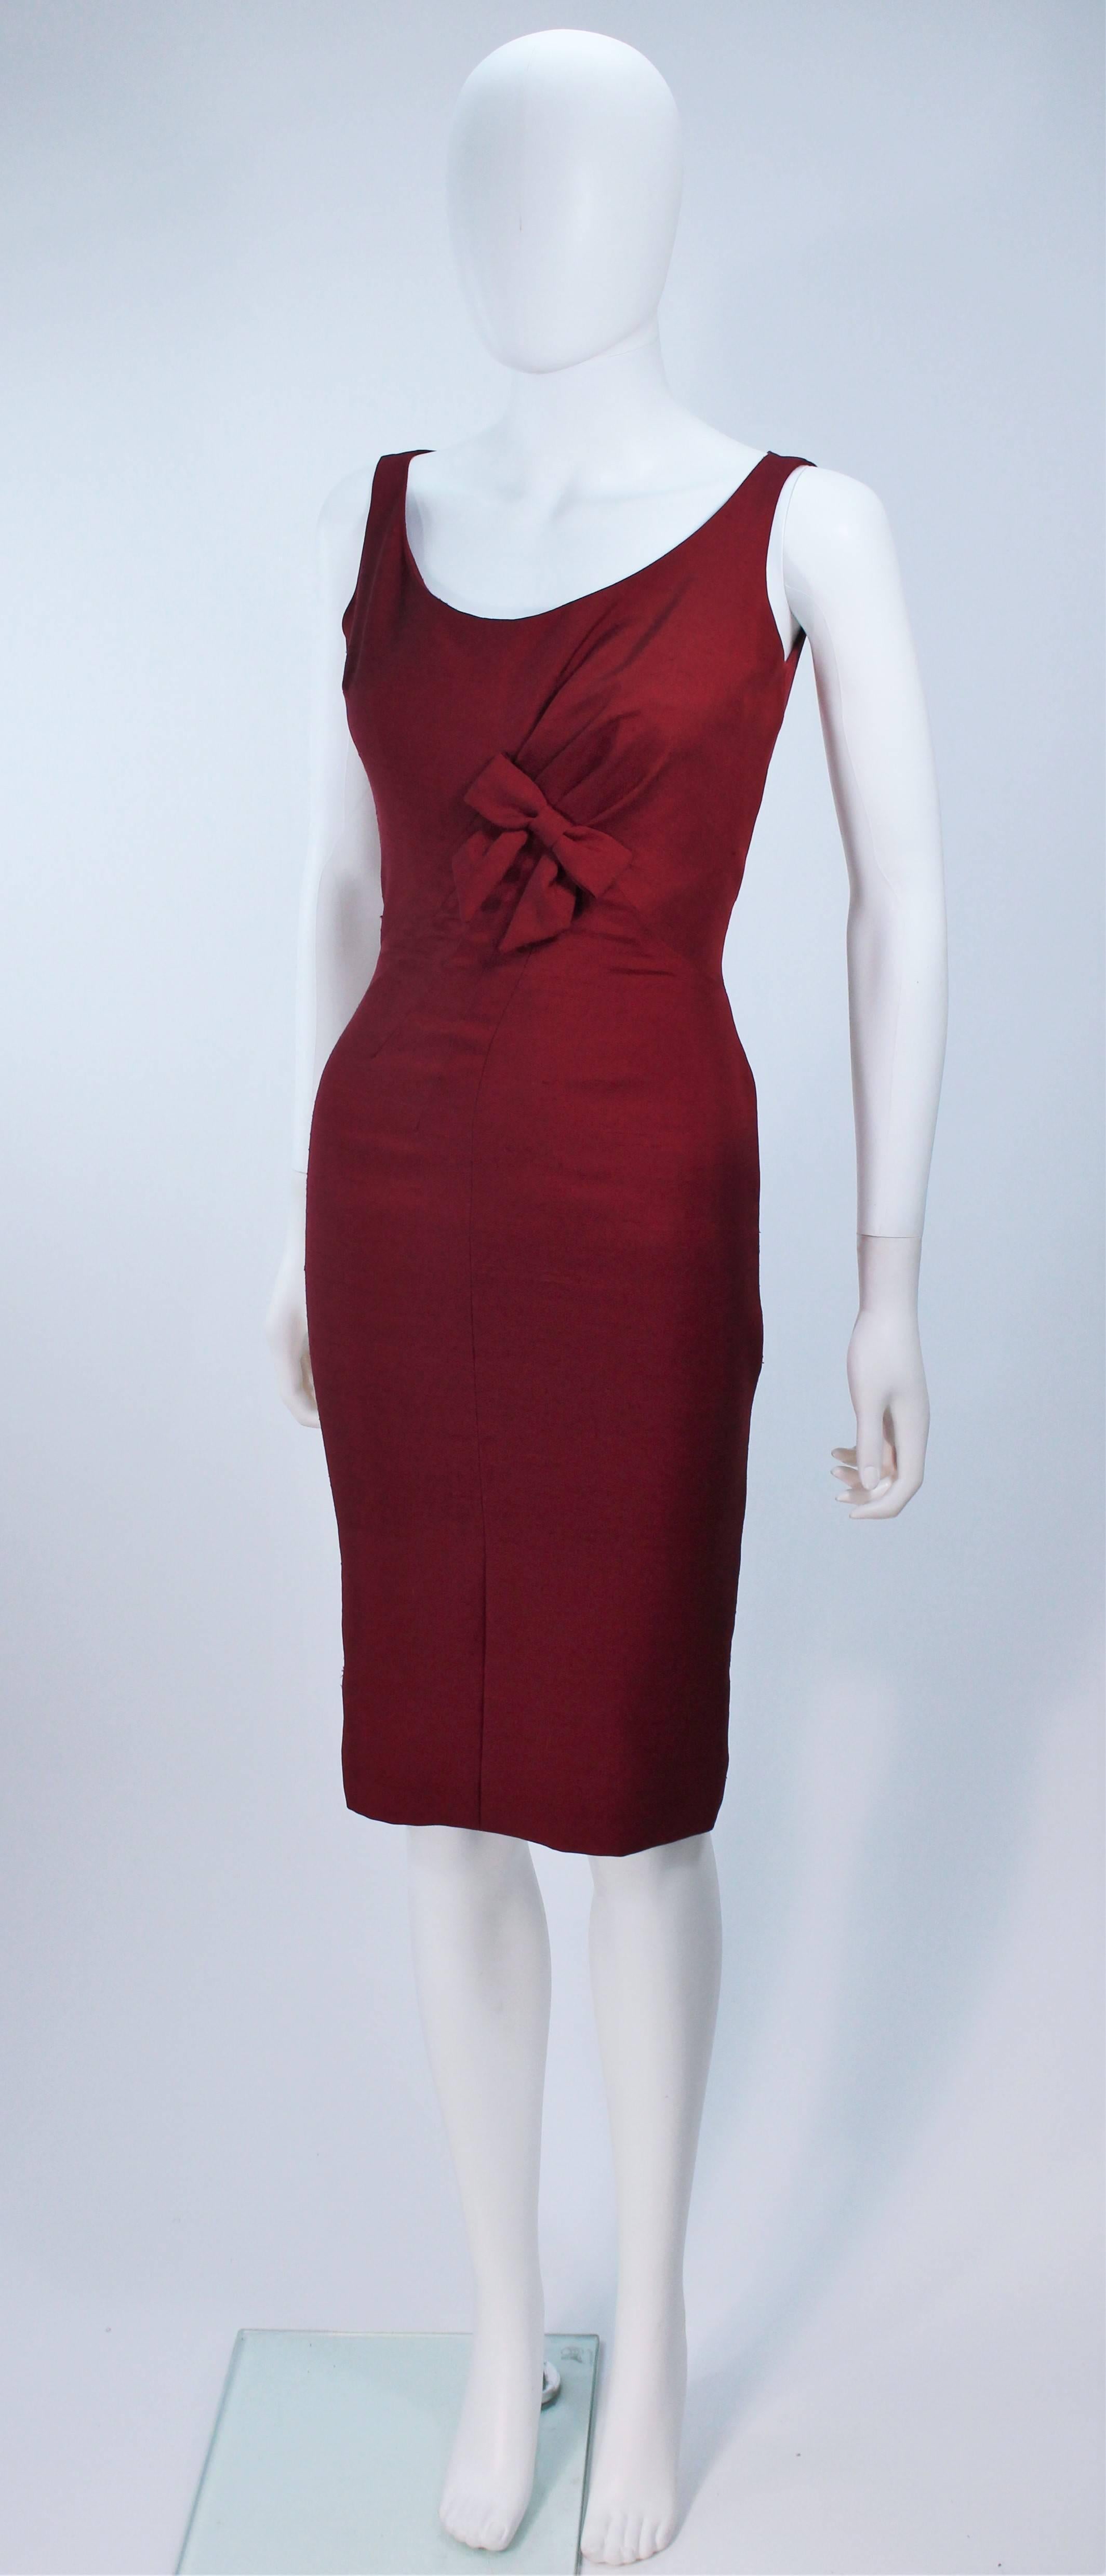 ELIZABETH MASON COUTURE Burgundy Silk Cocktail Dress with Bow Made to ...